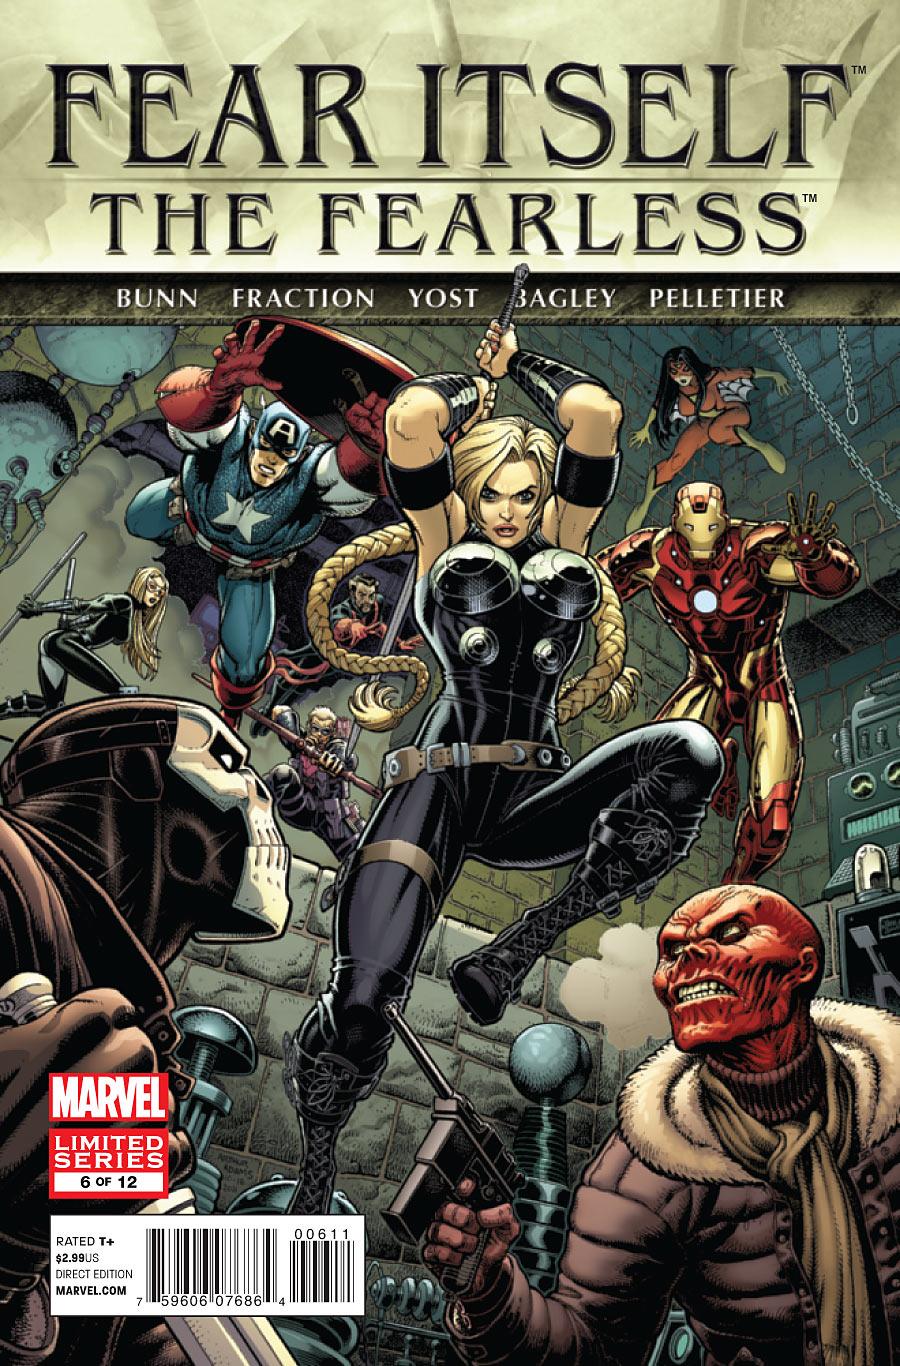 Fear Itself: The Fearless Vol. 1 #6